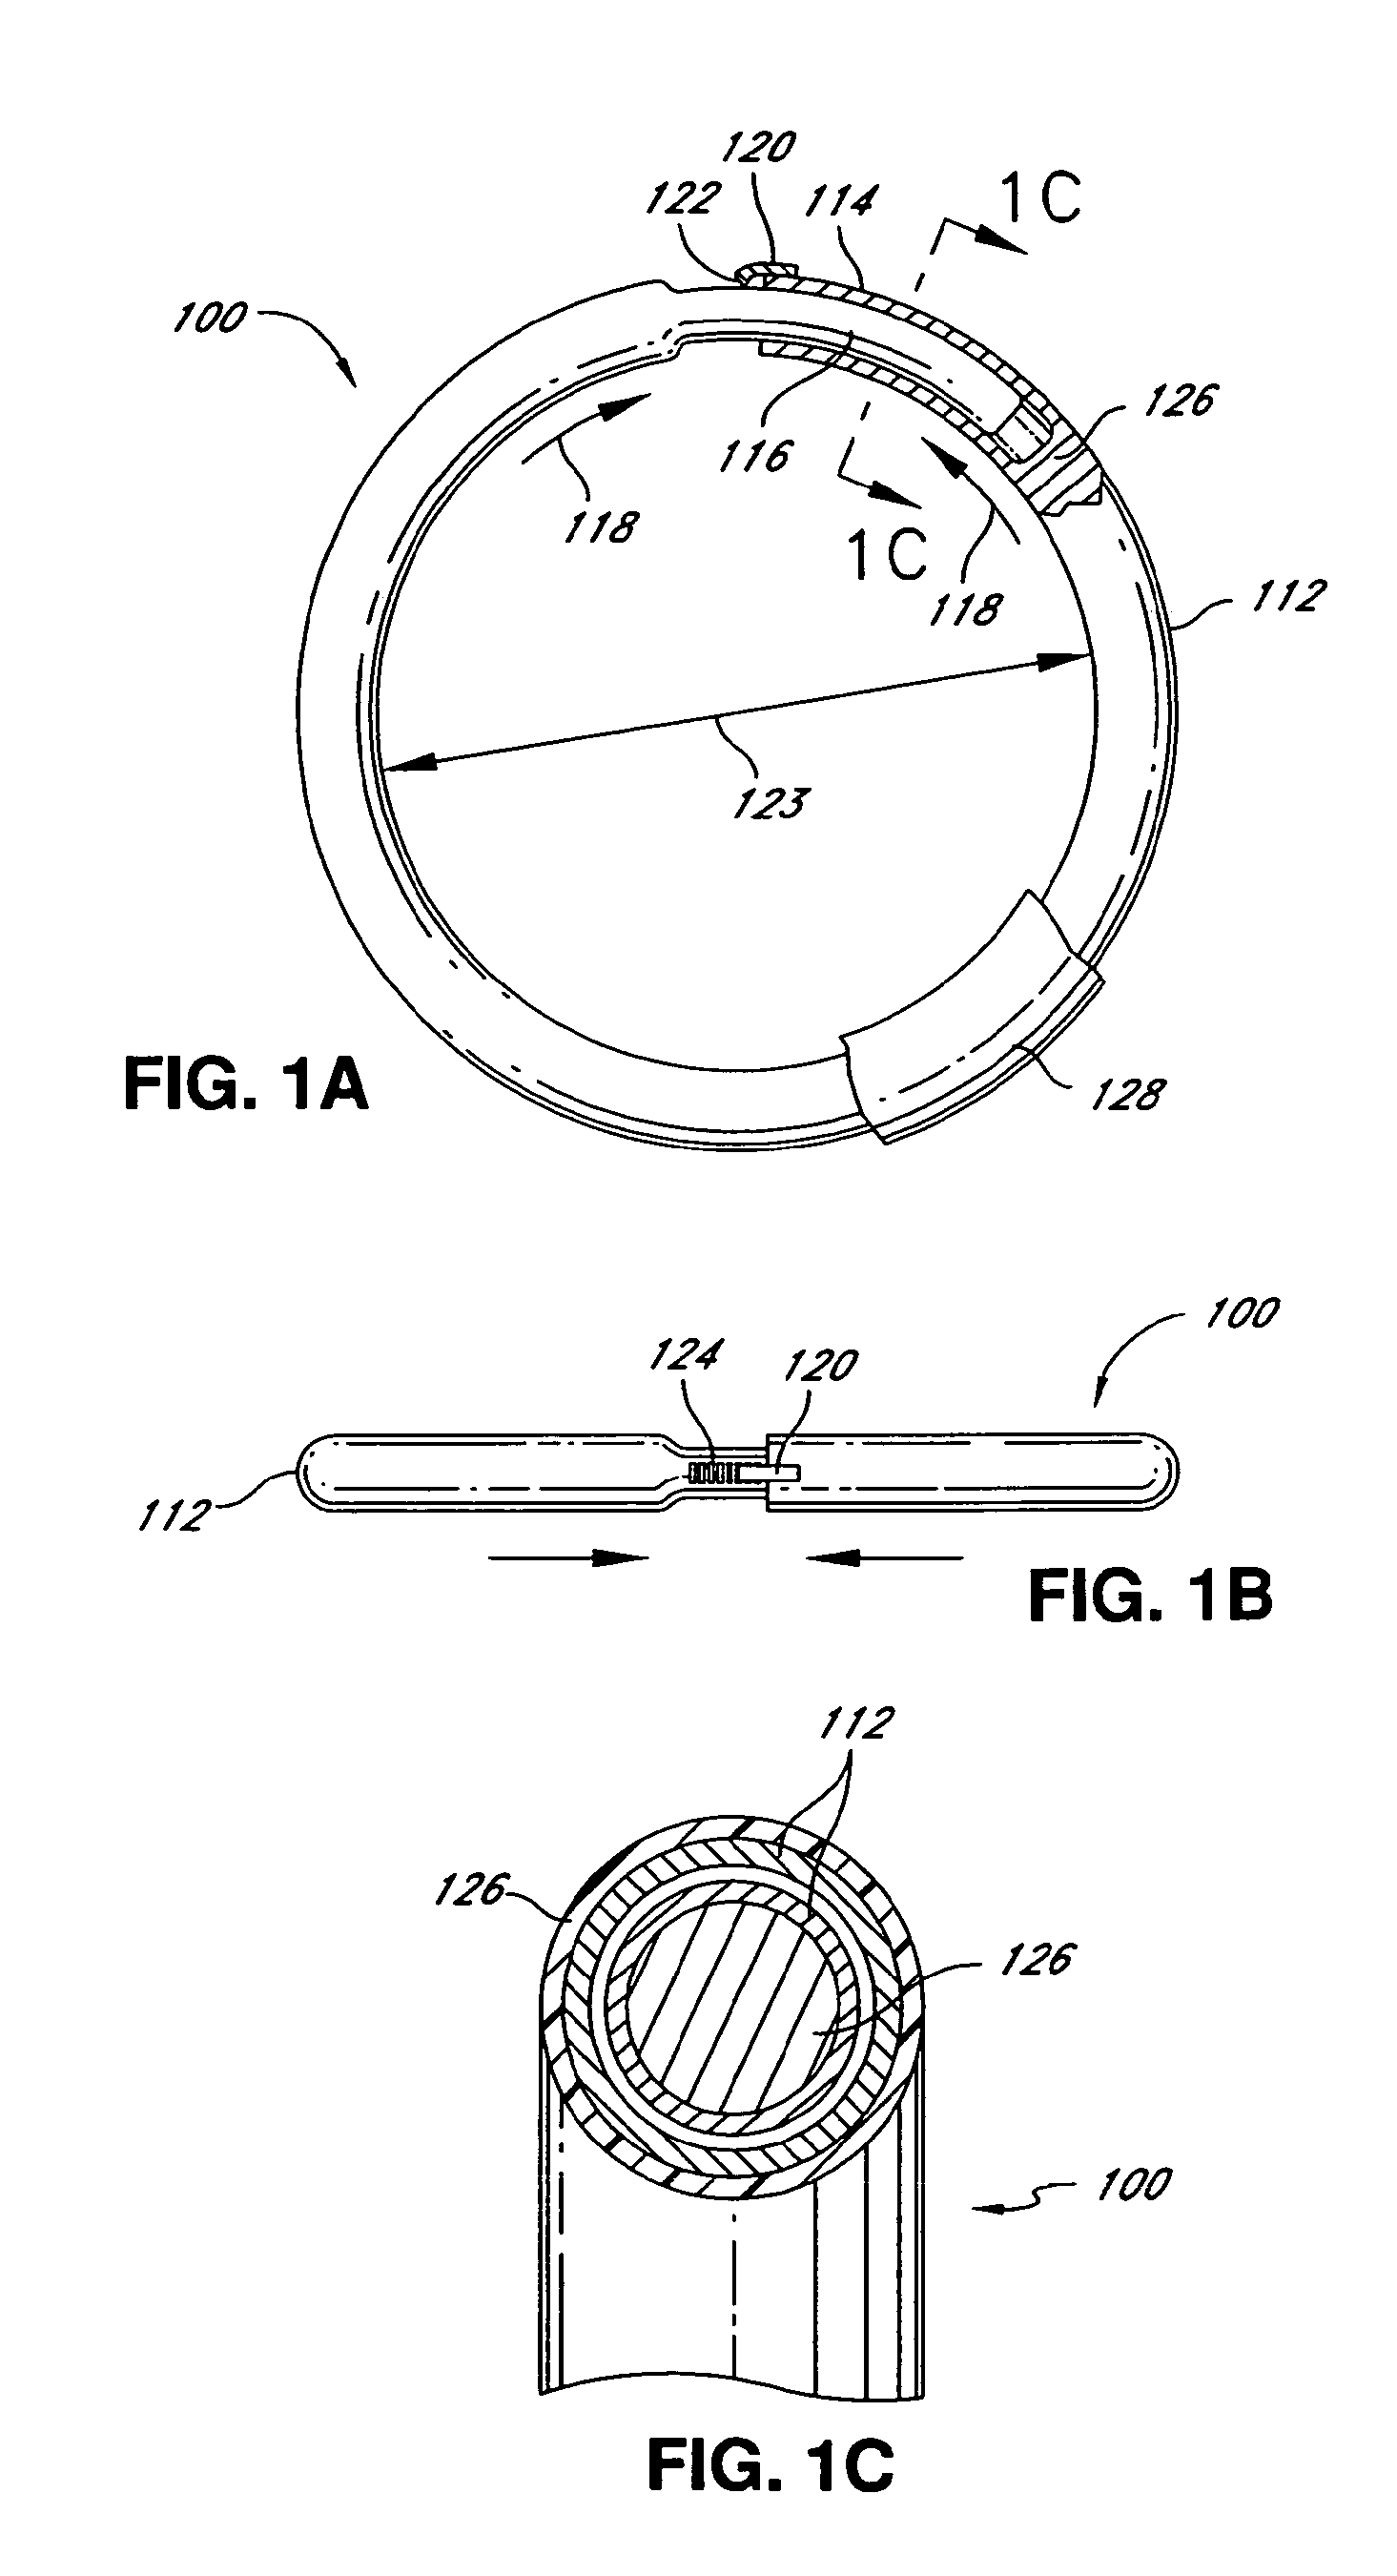 Adjustable annuloplasty ring activation system